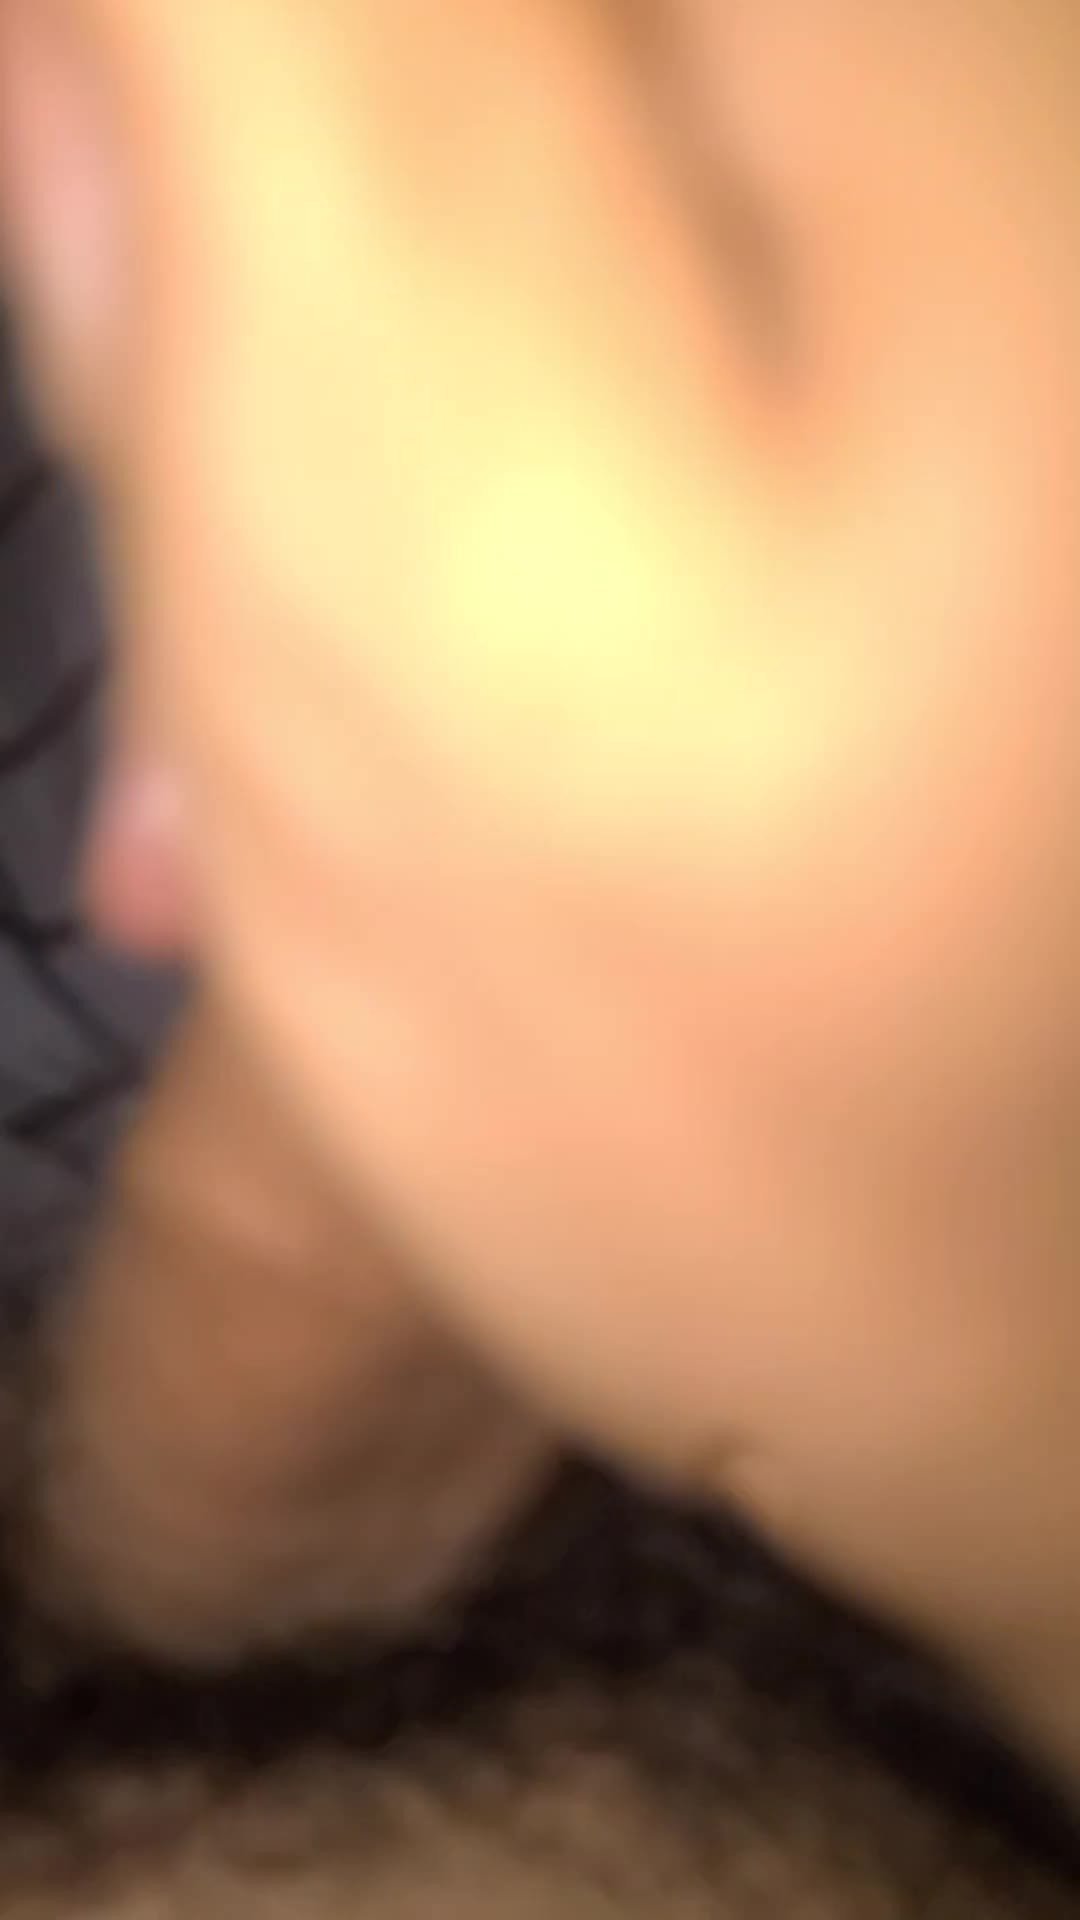 Watch the Video by Nick1292 with the username @Nick1292, posted on November 9, 2021 and the text says 'Like, share, and comment to make this cock cum for you! 💦'